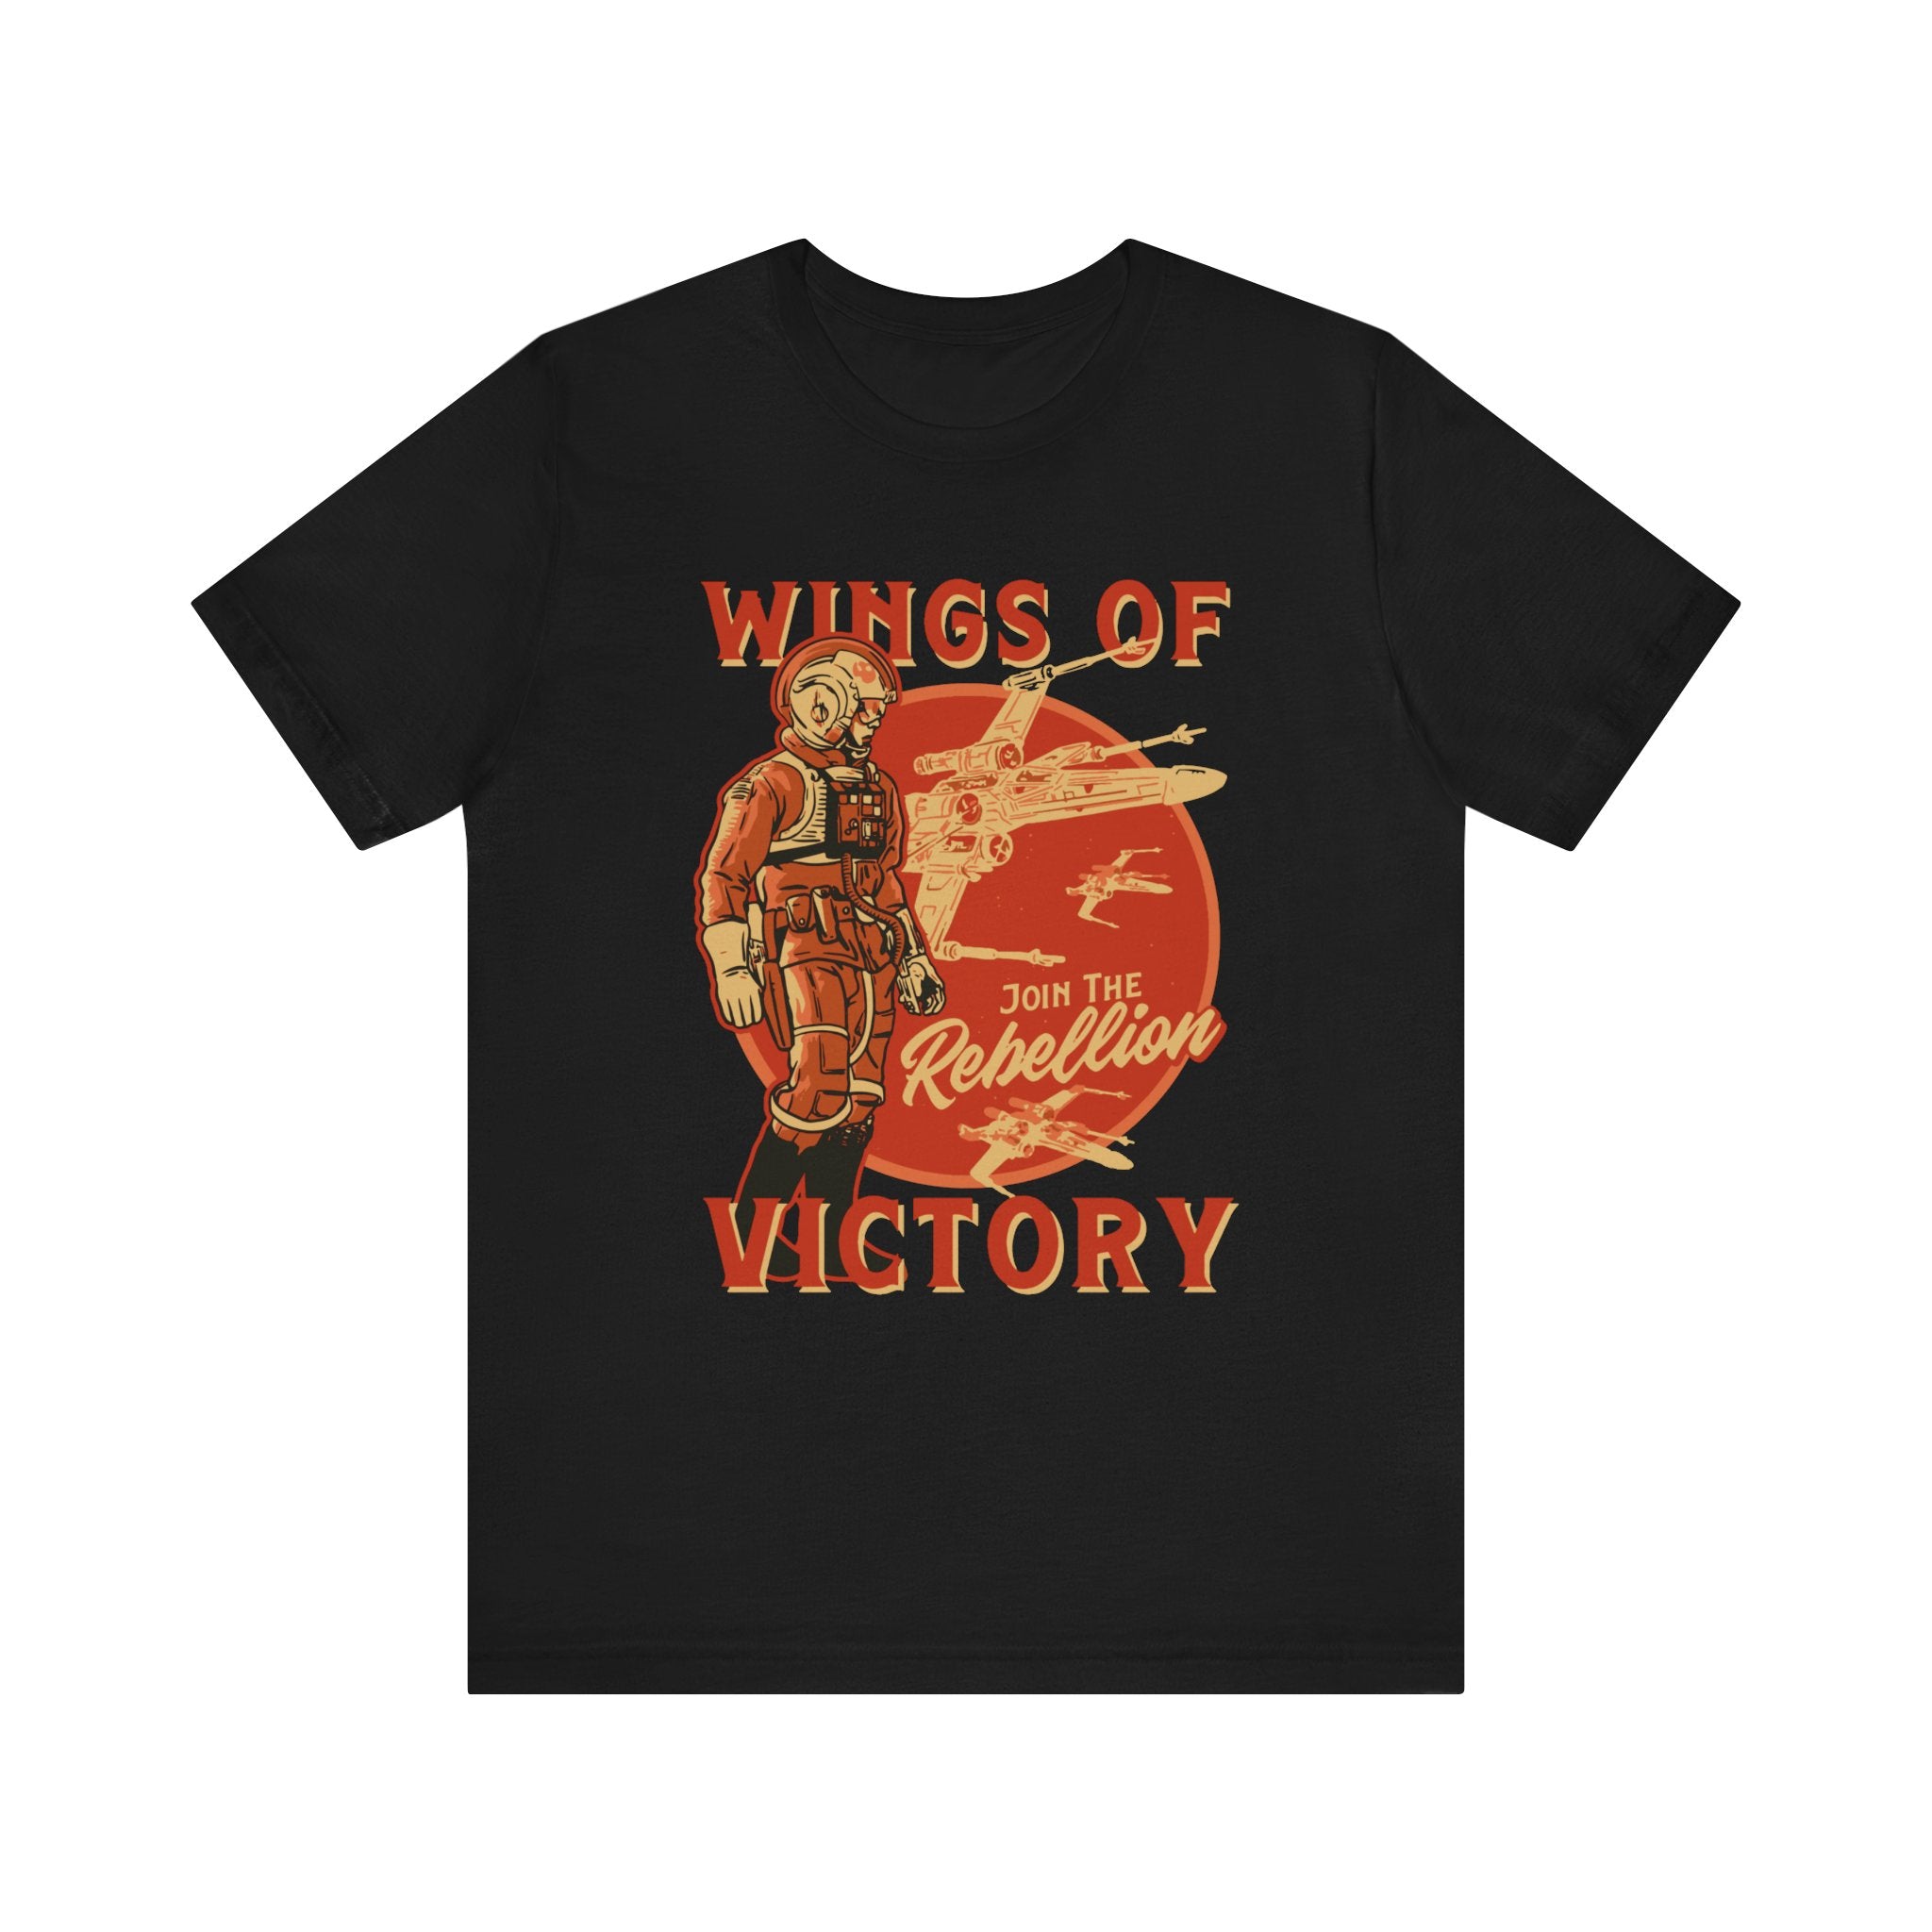 Unisex black Wings of Victory T-Shirt with a vintage-style graphic depicting a pilot and a spacecraft, featuring the text "wings of victory join the rebellion" in quality print.